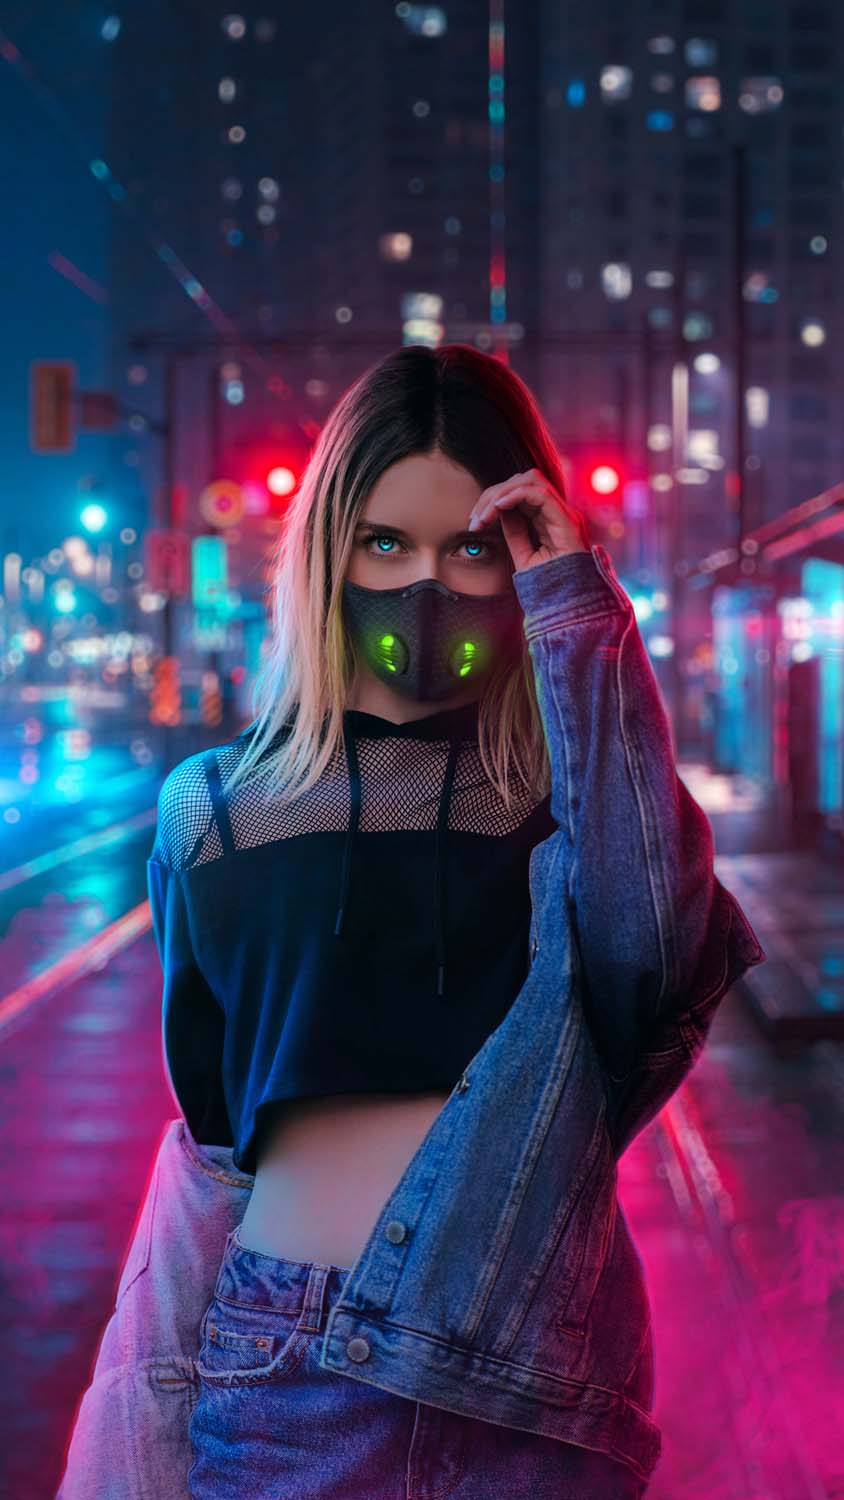 Cyber Girl 4K IPhone Wallpaper HD - IPhone Wallpapers : iPhone Wallpapers